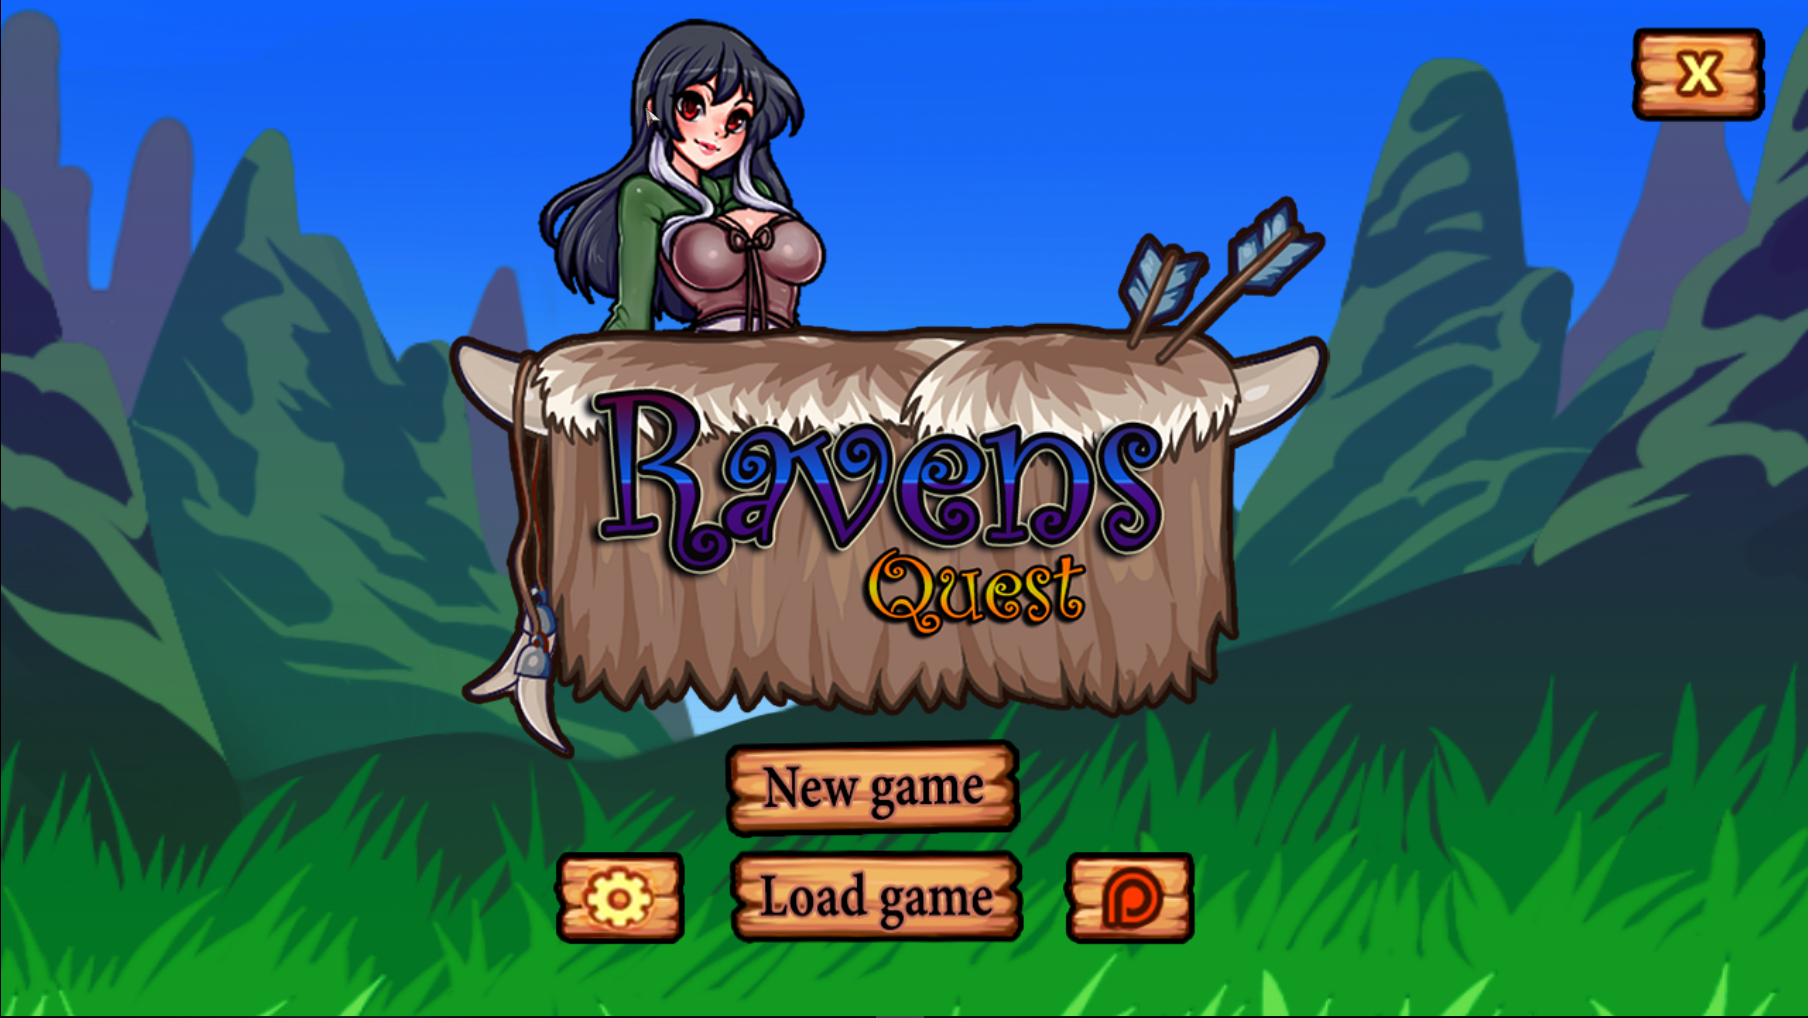 Raven's Quest - Version 1.4.0 by PiXel Games Win/Mac/Android. 